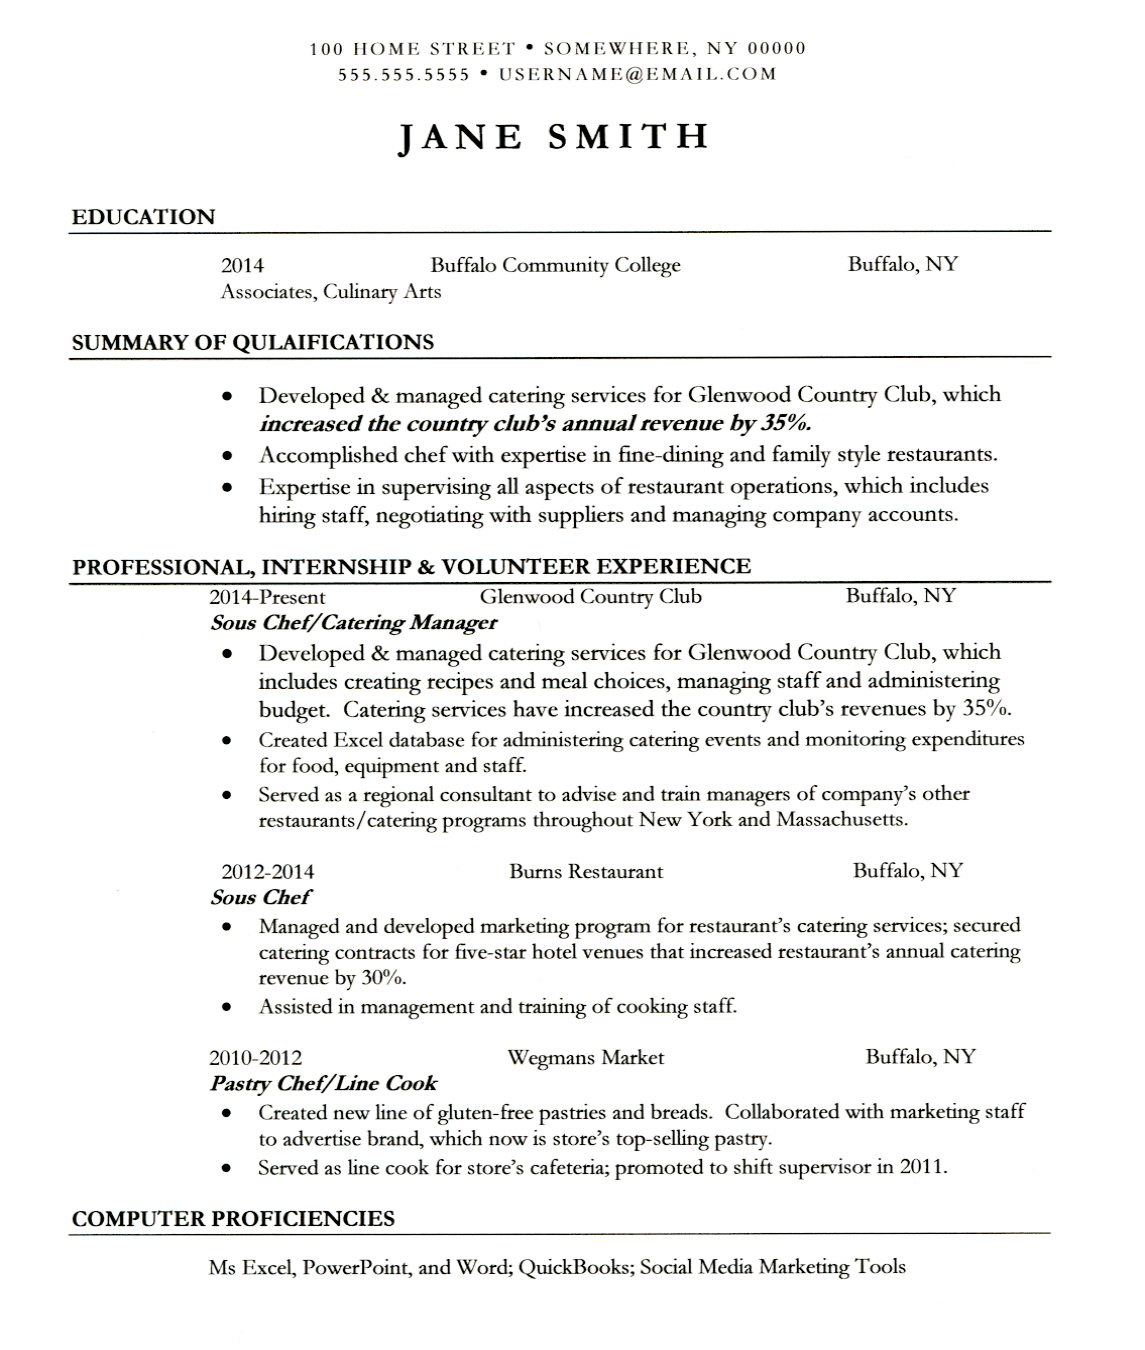 Resume for school counselors